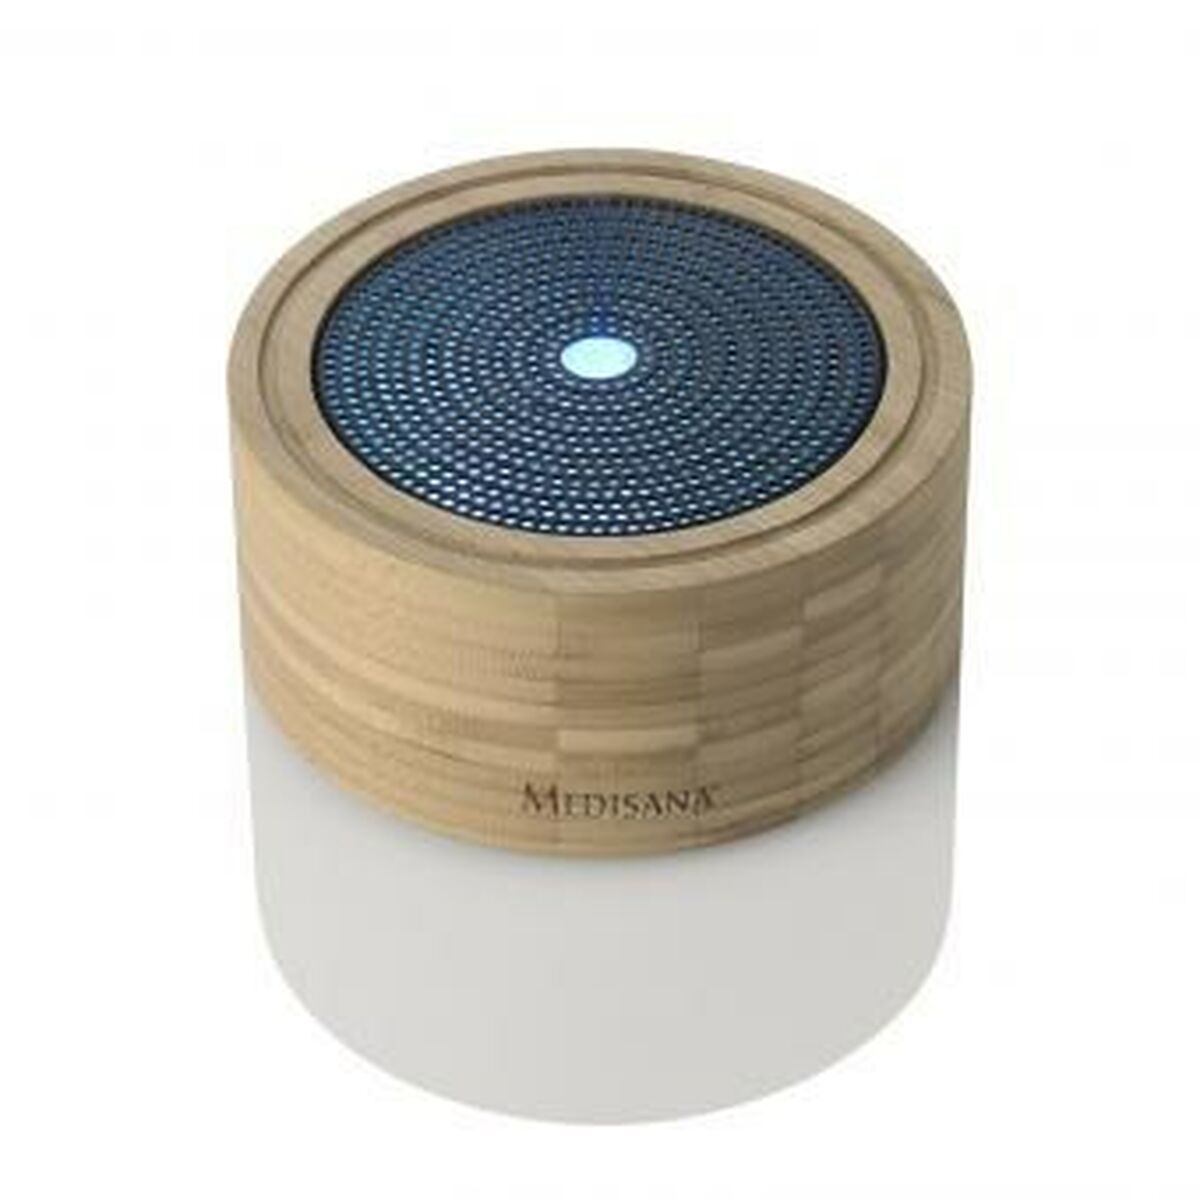 Essential Oil Diffuser Medisana AD 625 Brown Wood (1 Piece)-0